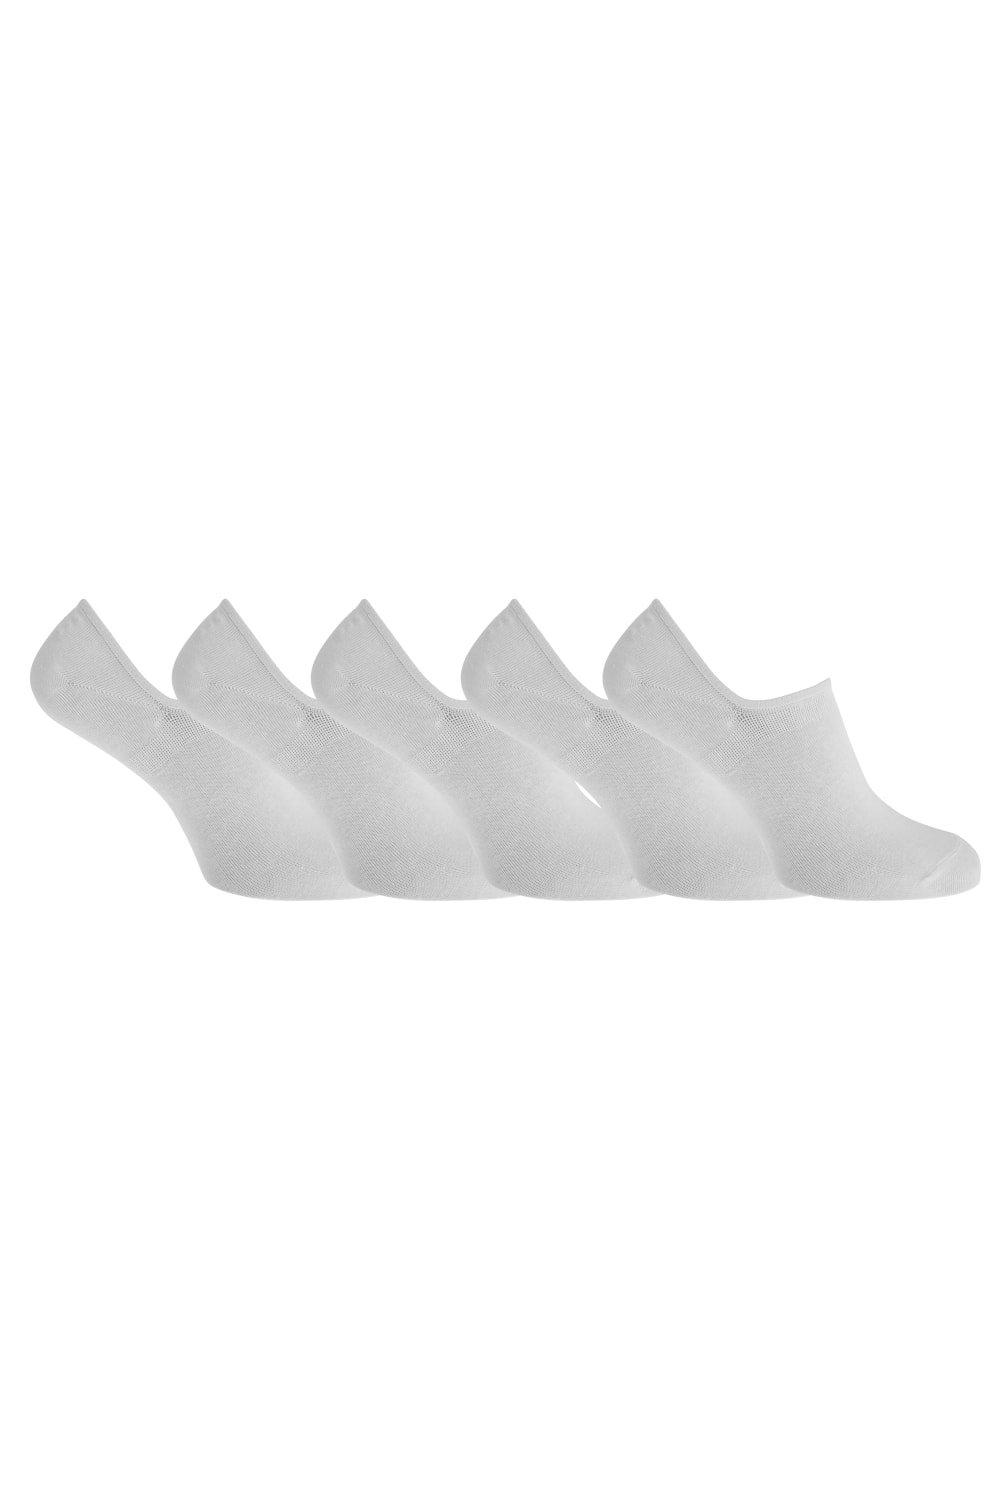 T-Sport Silicone Support Invisible Trainer Socks (5 Pairs)